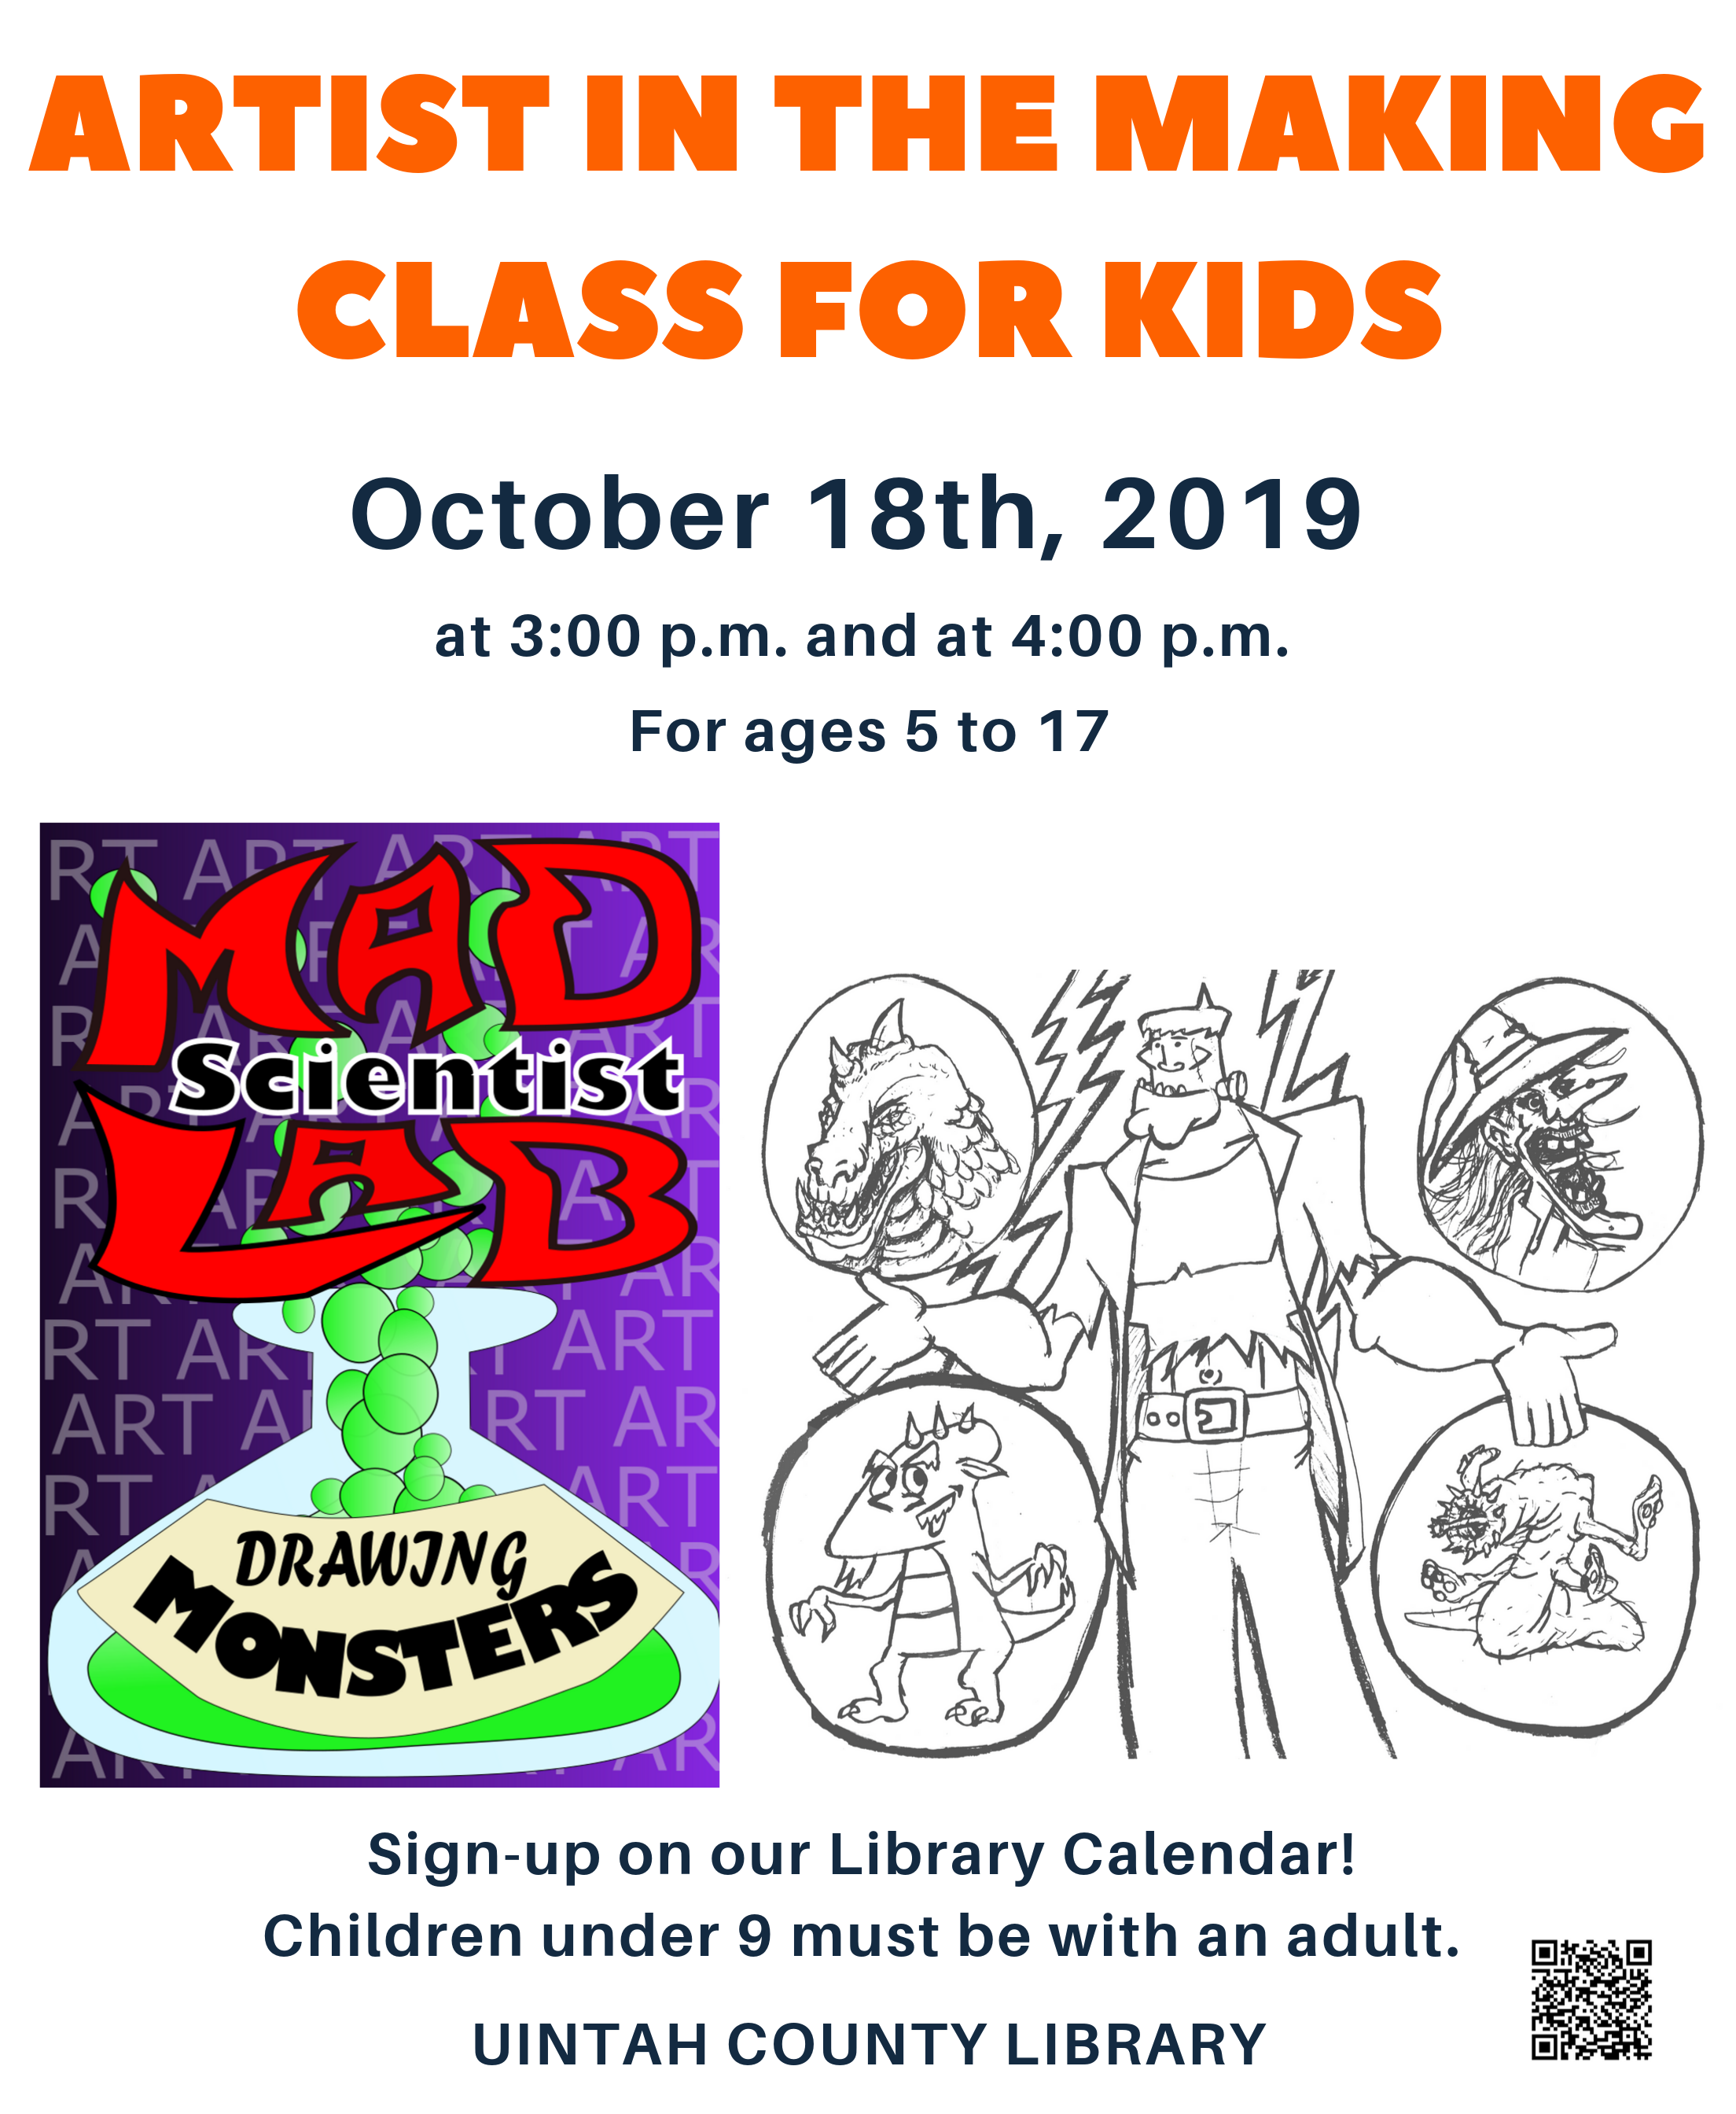 Artist in the Making Class For Kids October 18th 2019 at 3:00 p.m. and at 4:00 p.m. for ages 5 to 17 "Mad Scientist Lab: Drawing Monsters" images. Sign-up on our Library Calendar! Children under 9 must be with an adult. Uintah County Library qr code